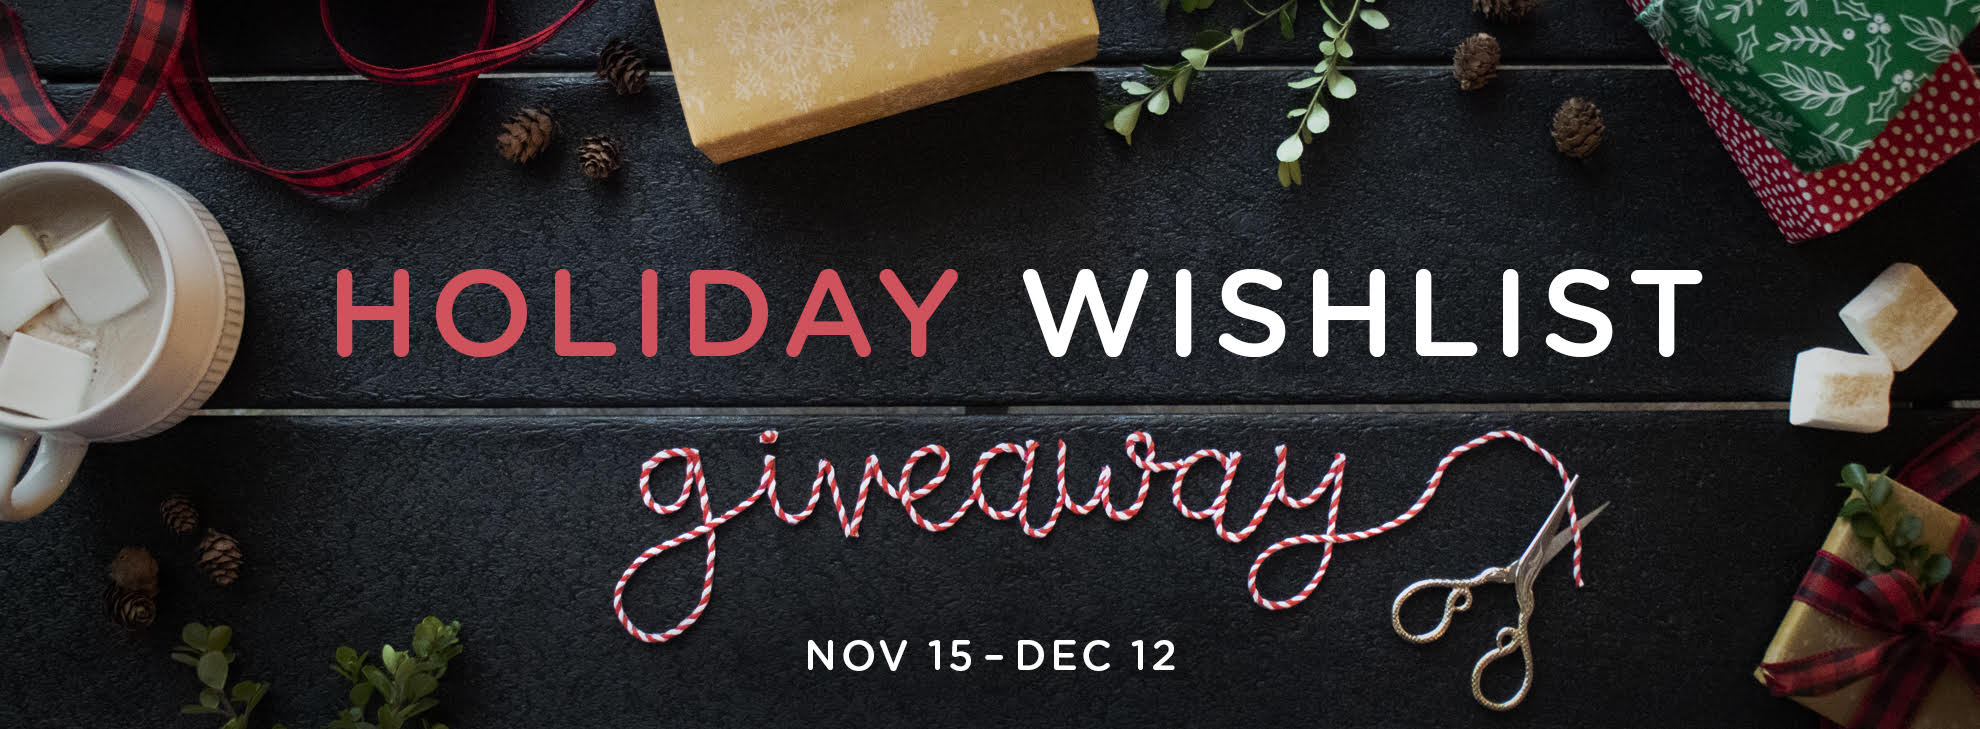 Holiday Wish List Giveaway Terms